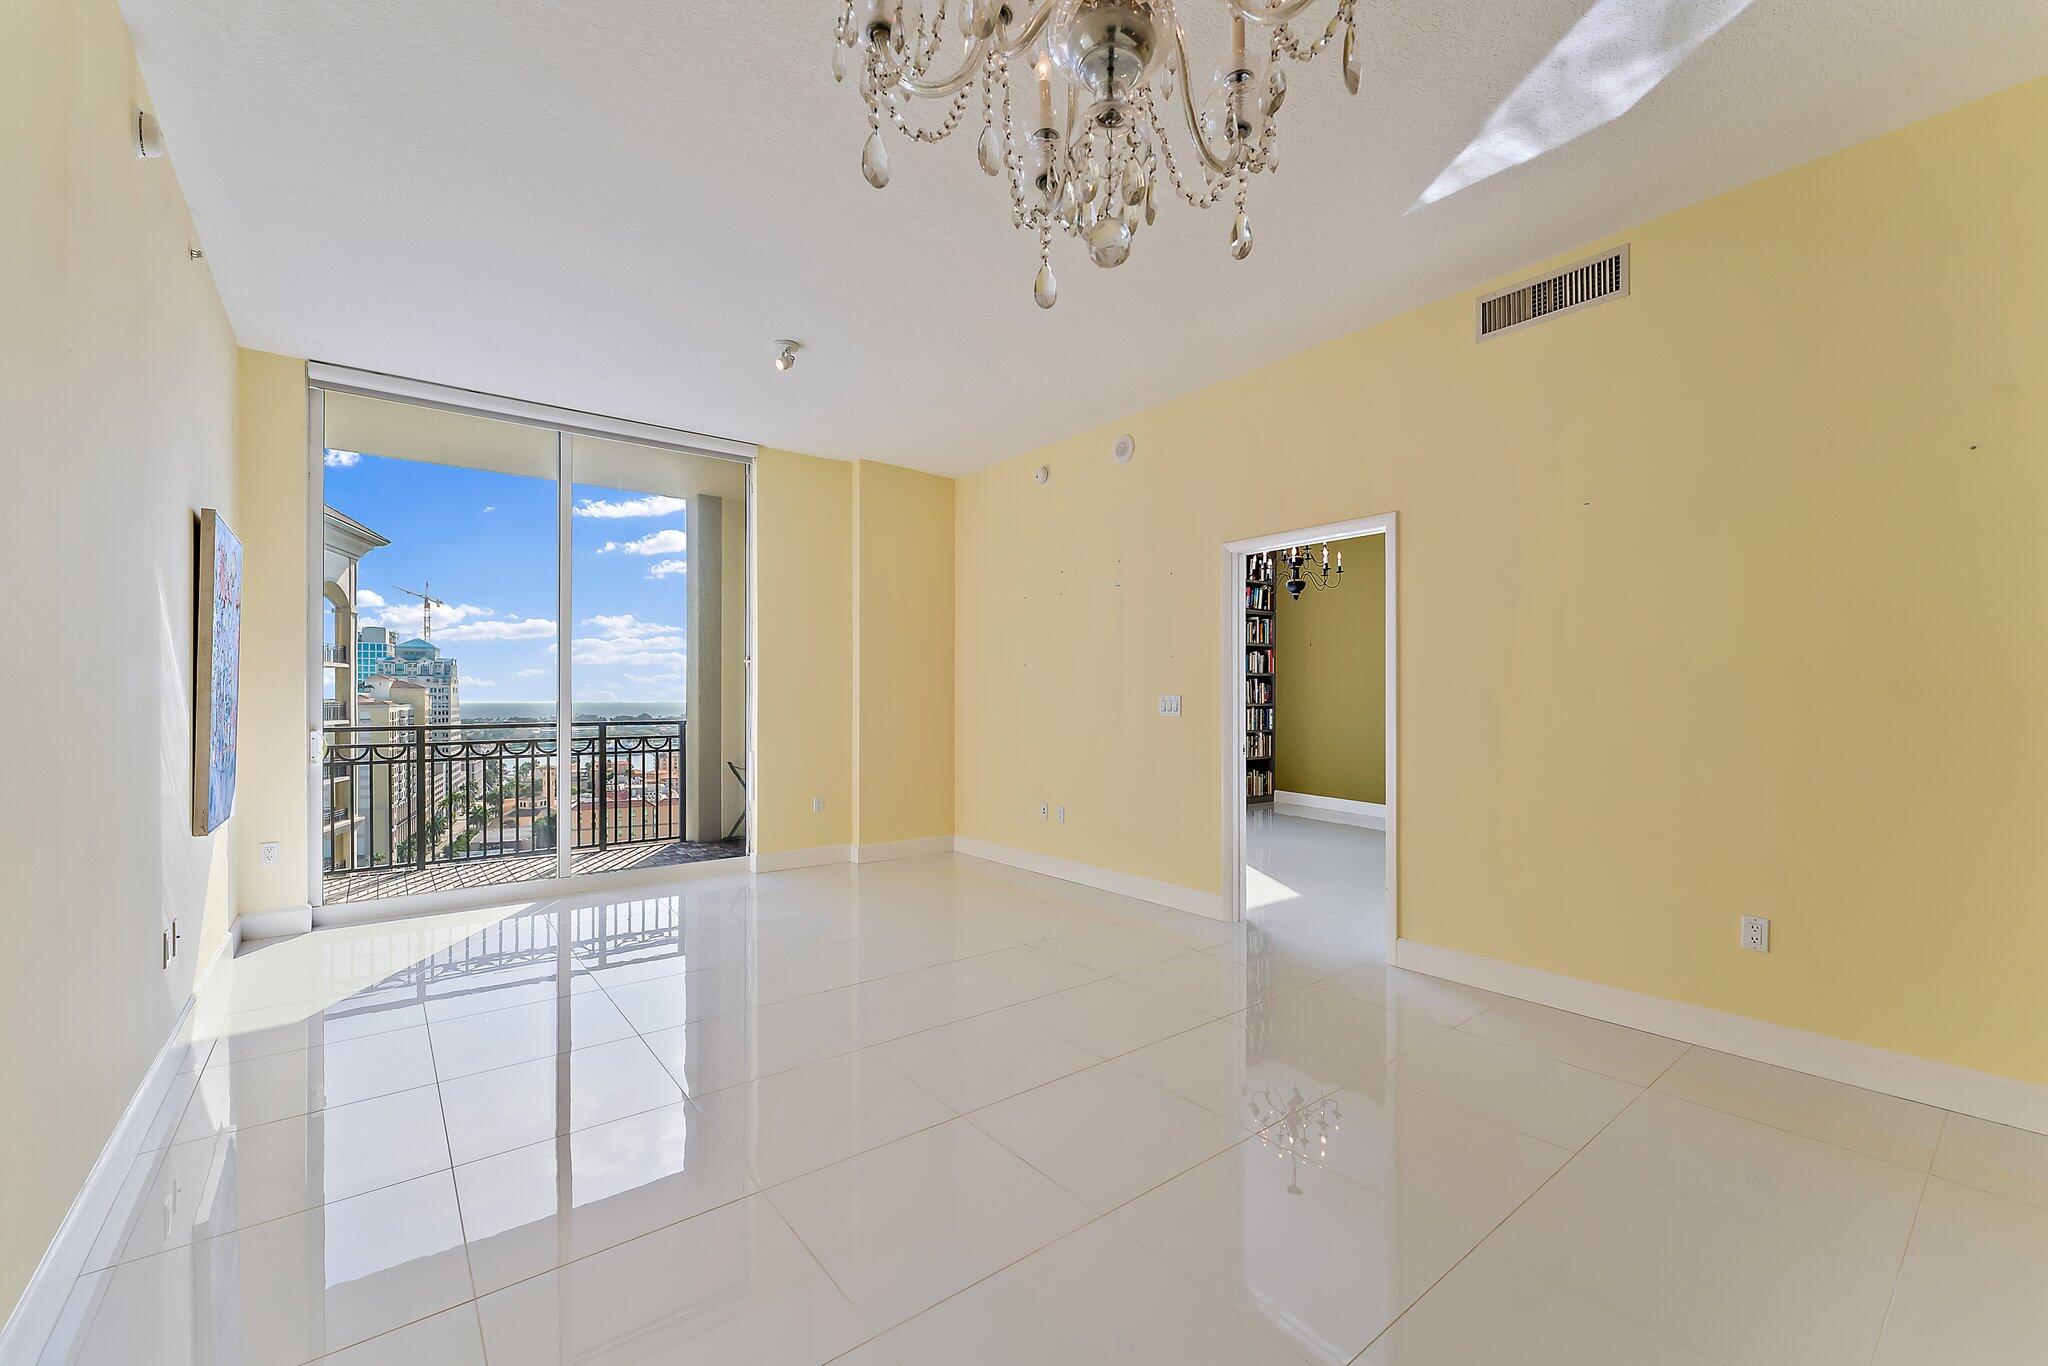 Property for Sale at 550 Okeechobee Boulevard Mph15, West Palm Beach, Palm Beach County, Florida - Bedrooms: 2 
Bathrooms: 2  - $995,000